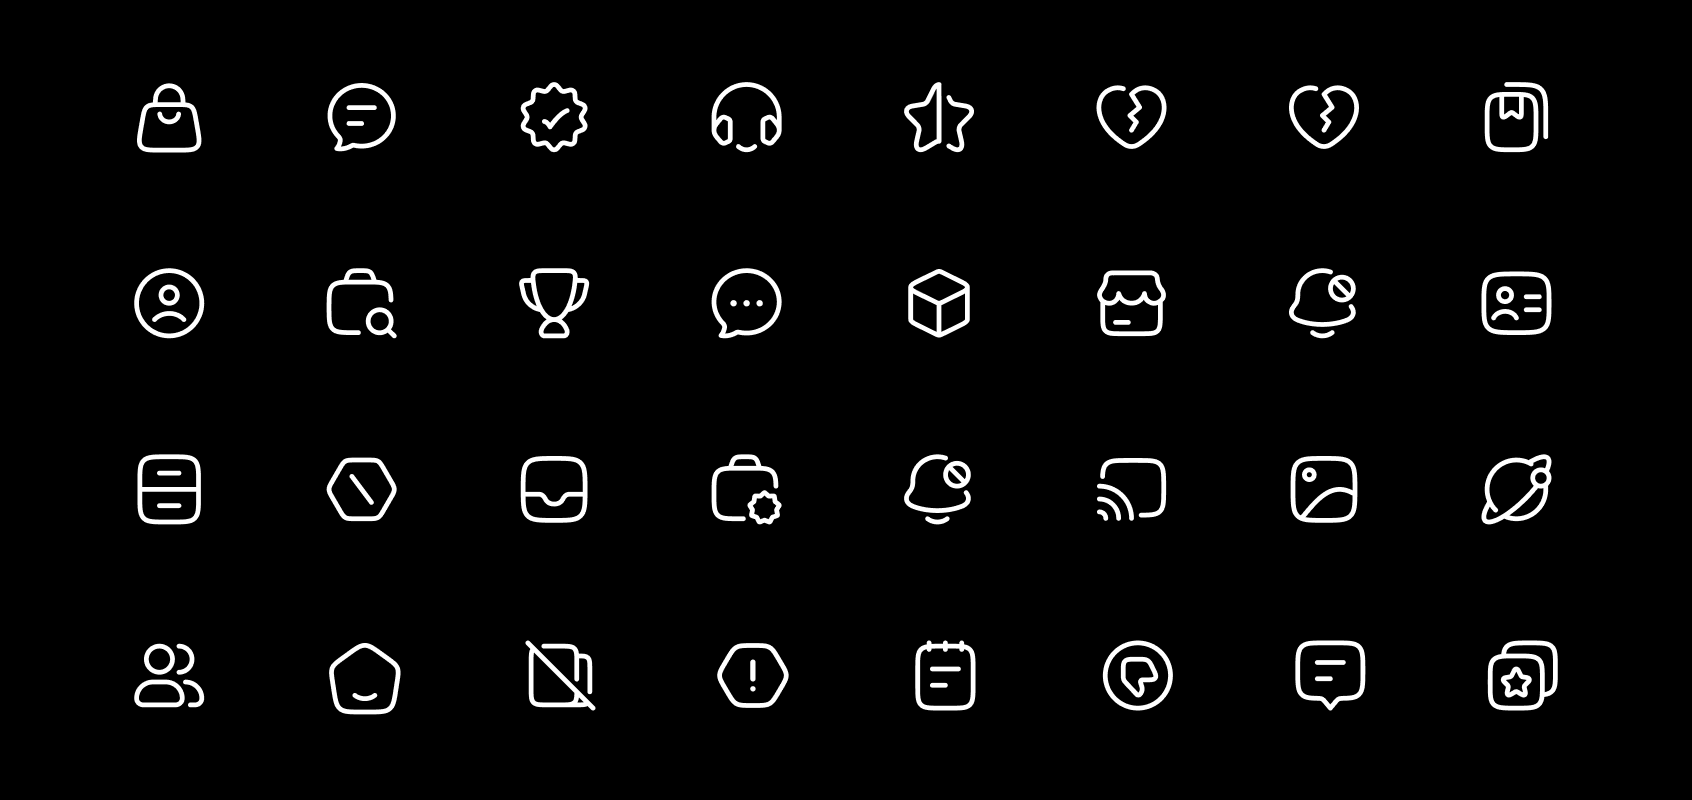 Hugeicons Pro: The Ultimate Free UI Icons